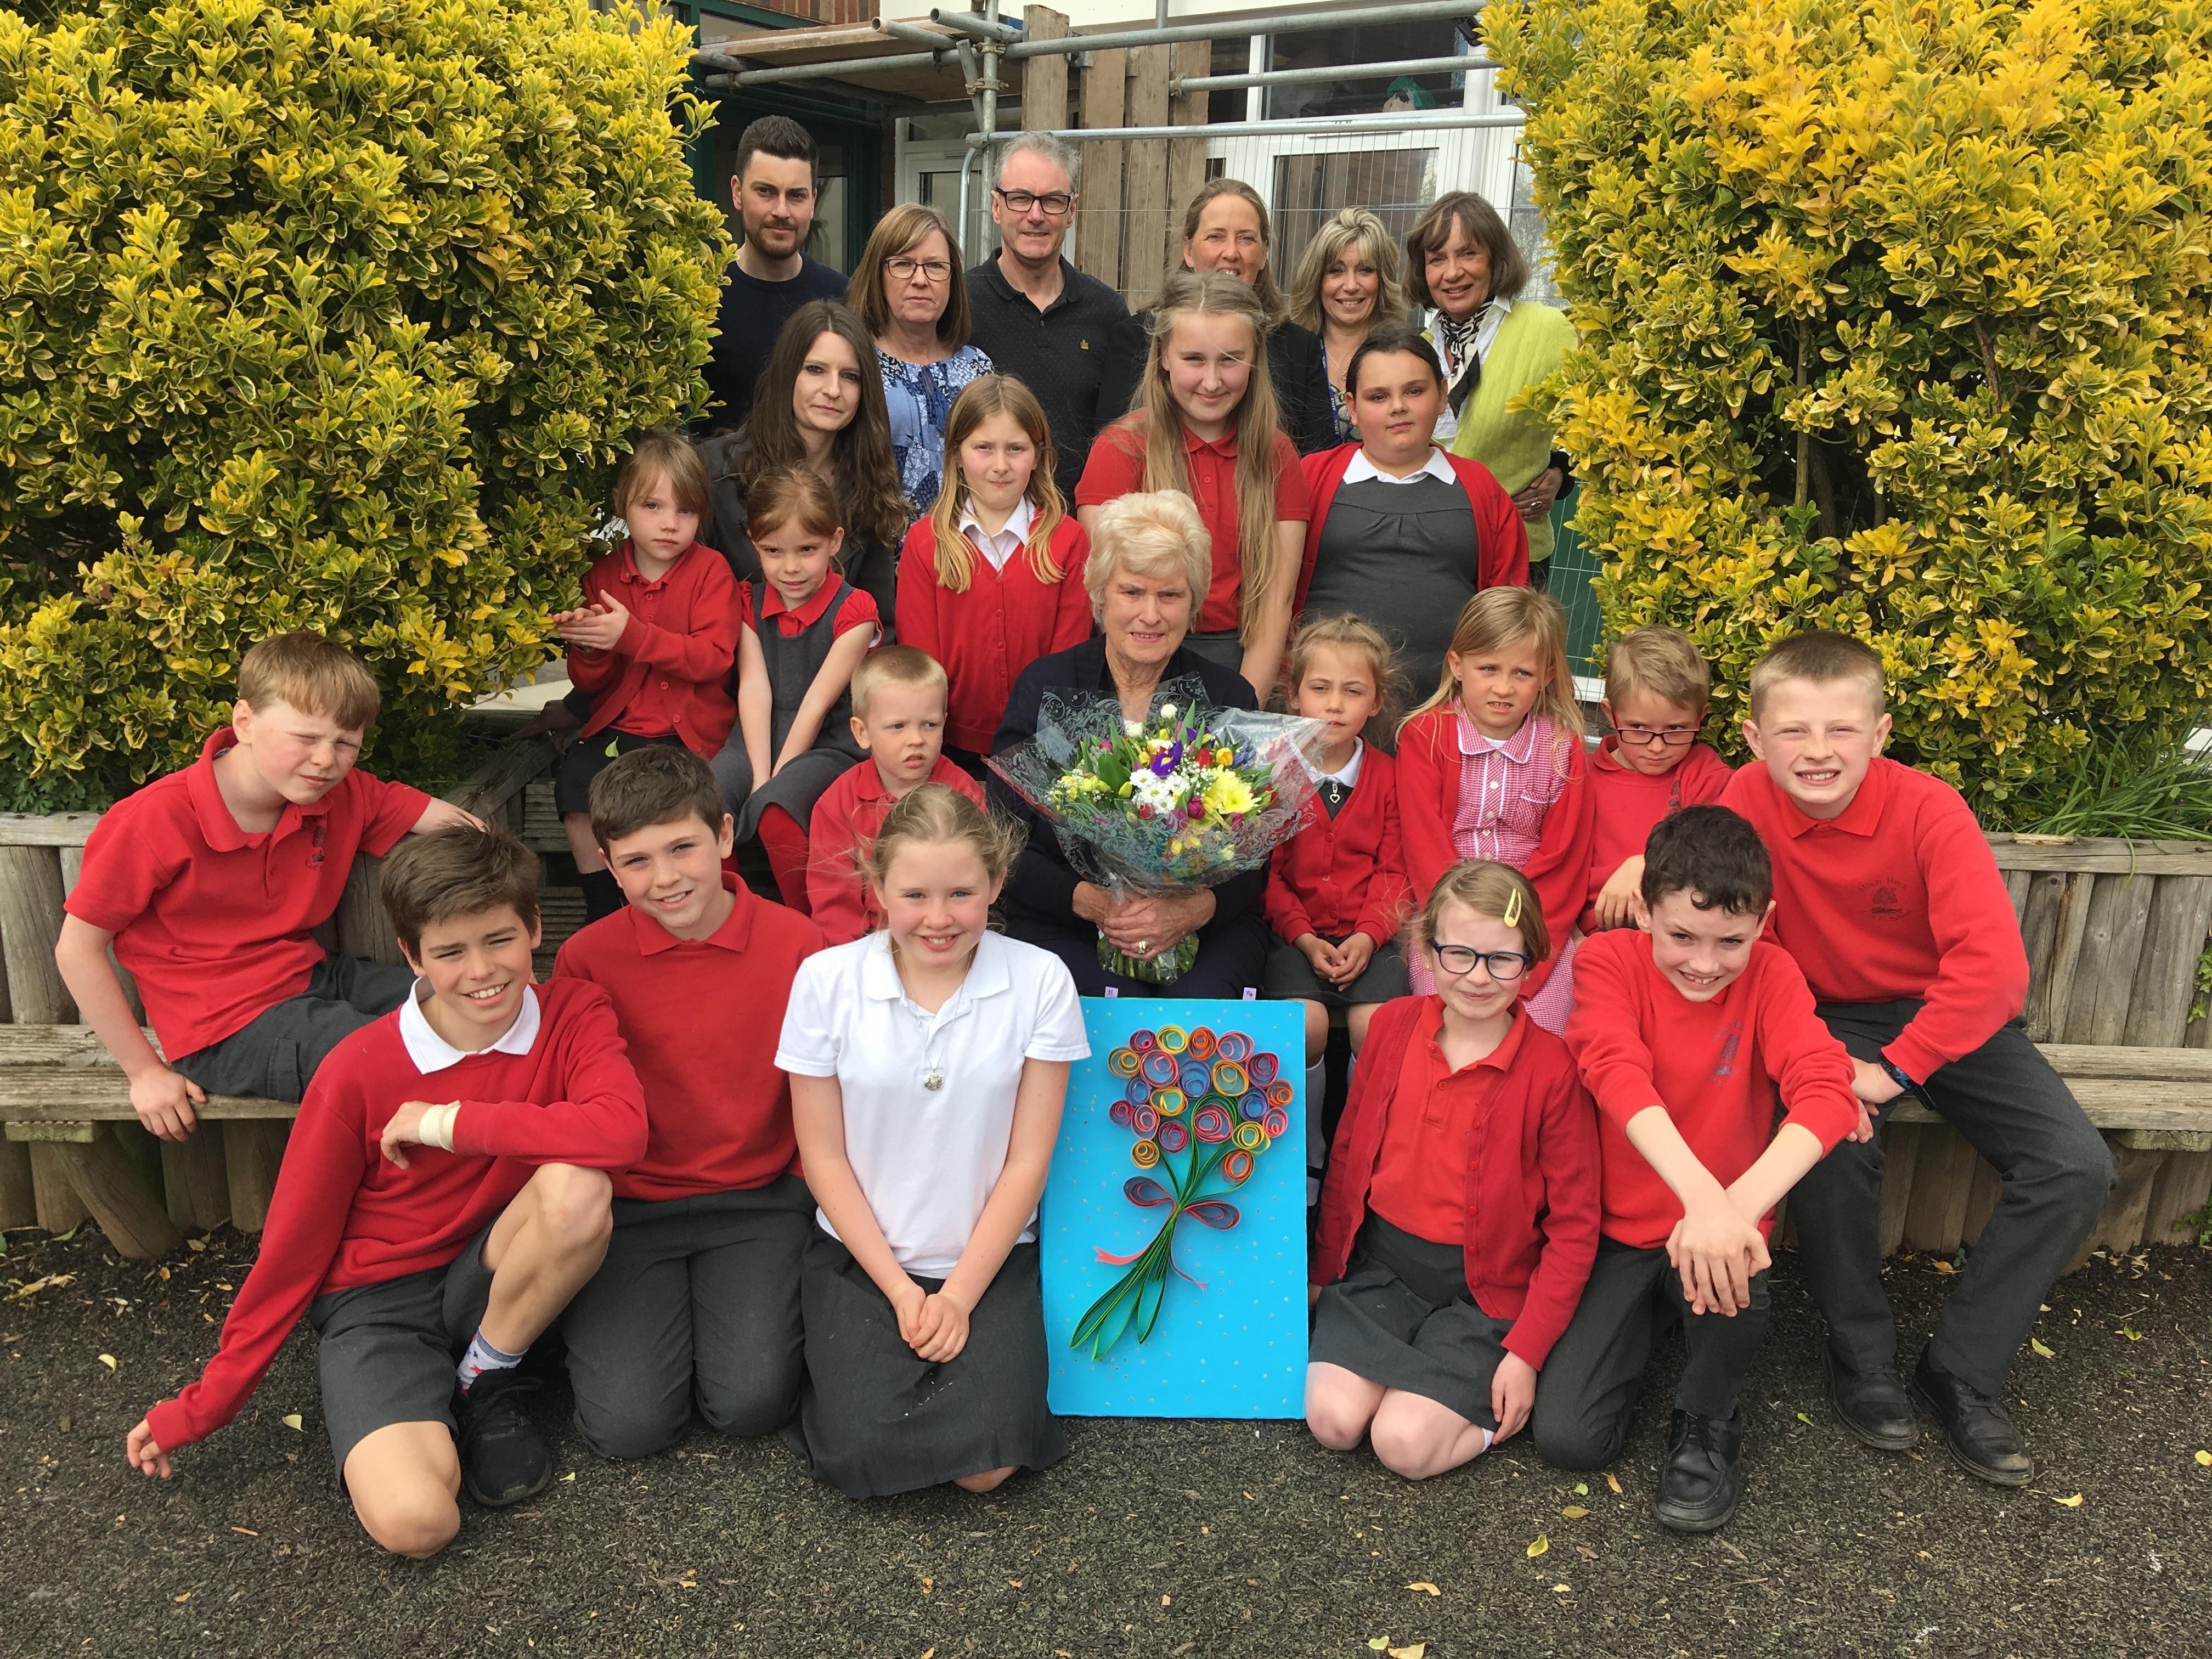 EDUCATION | Popular member of staff retires after nearly 50 years’ school service